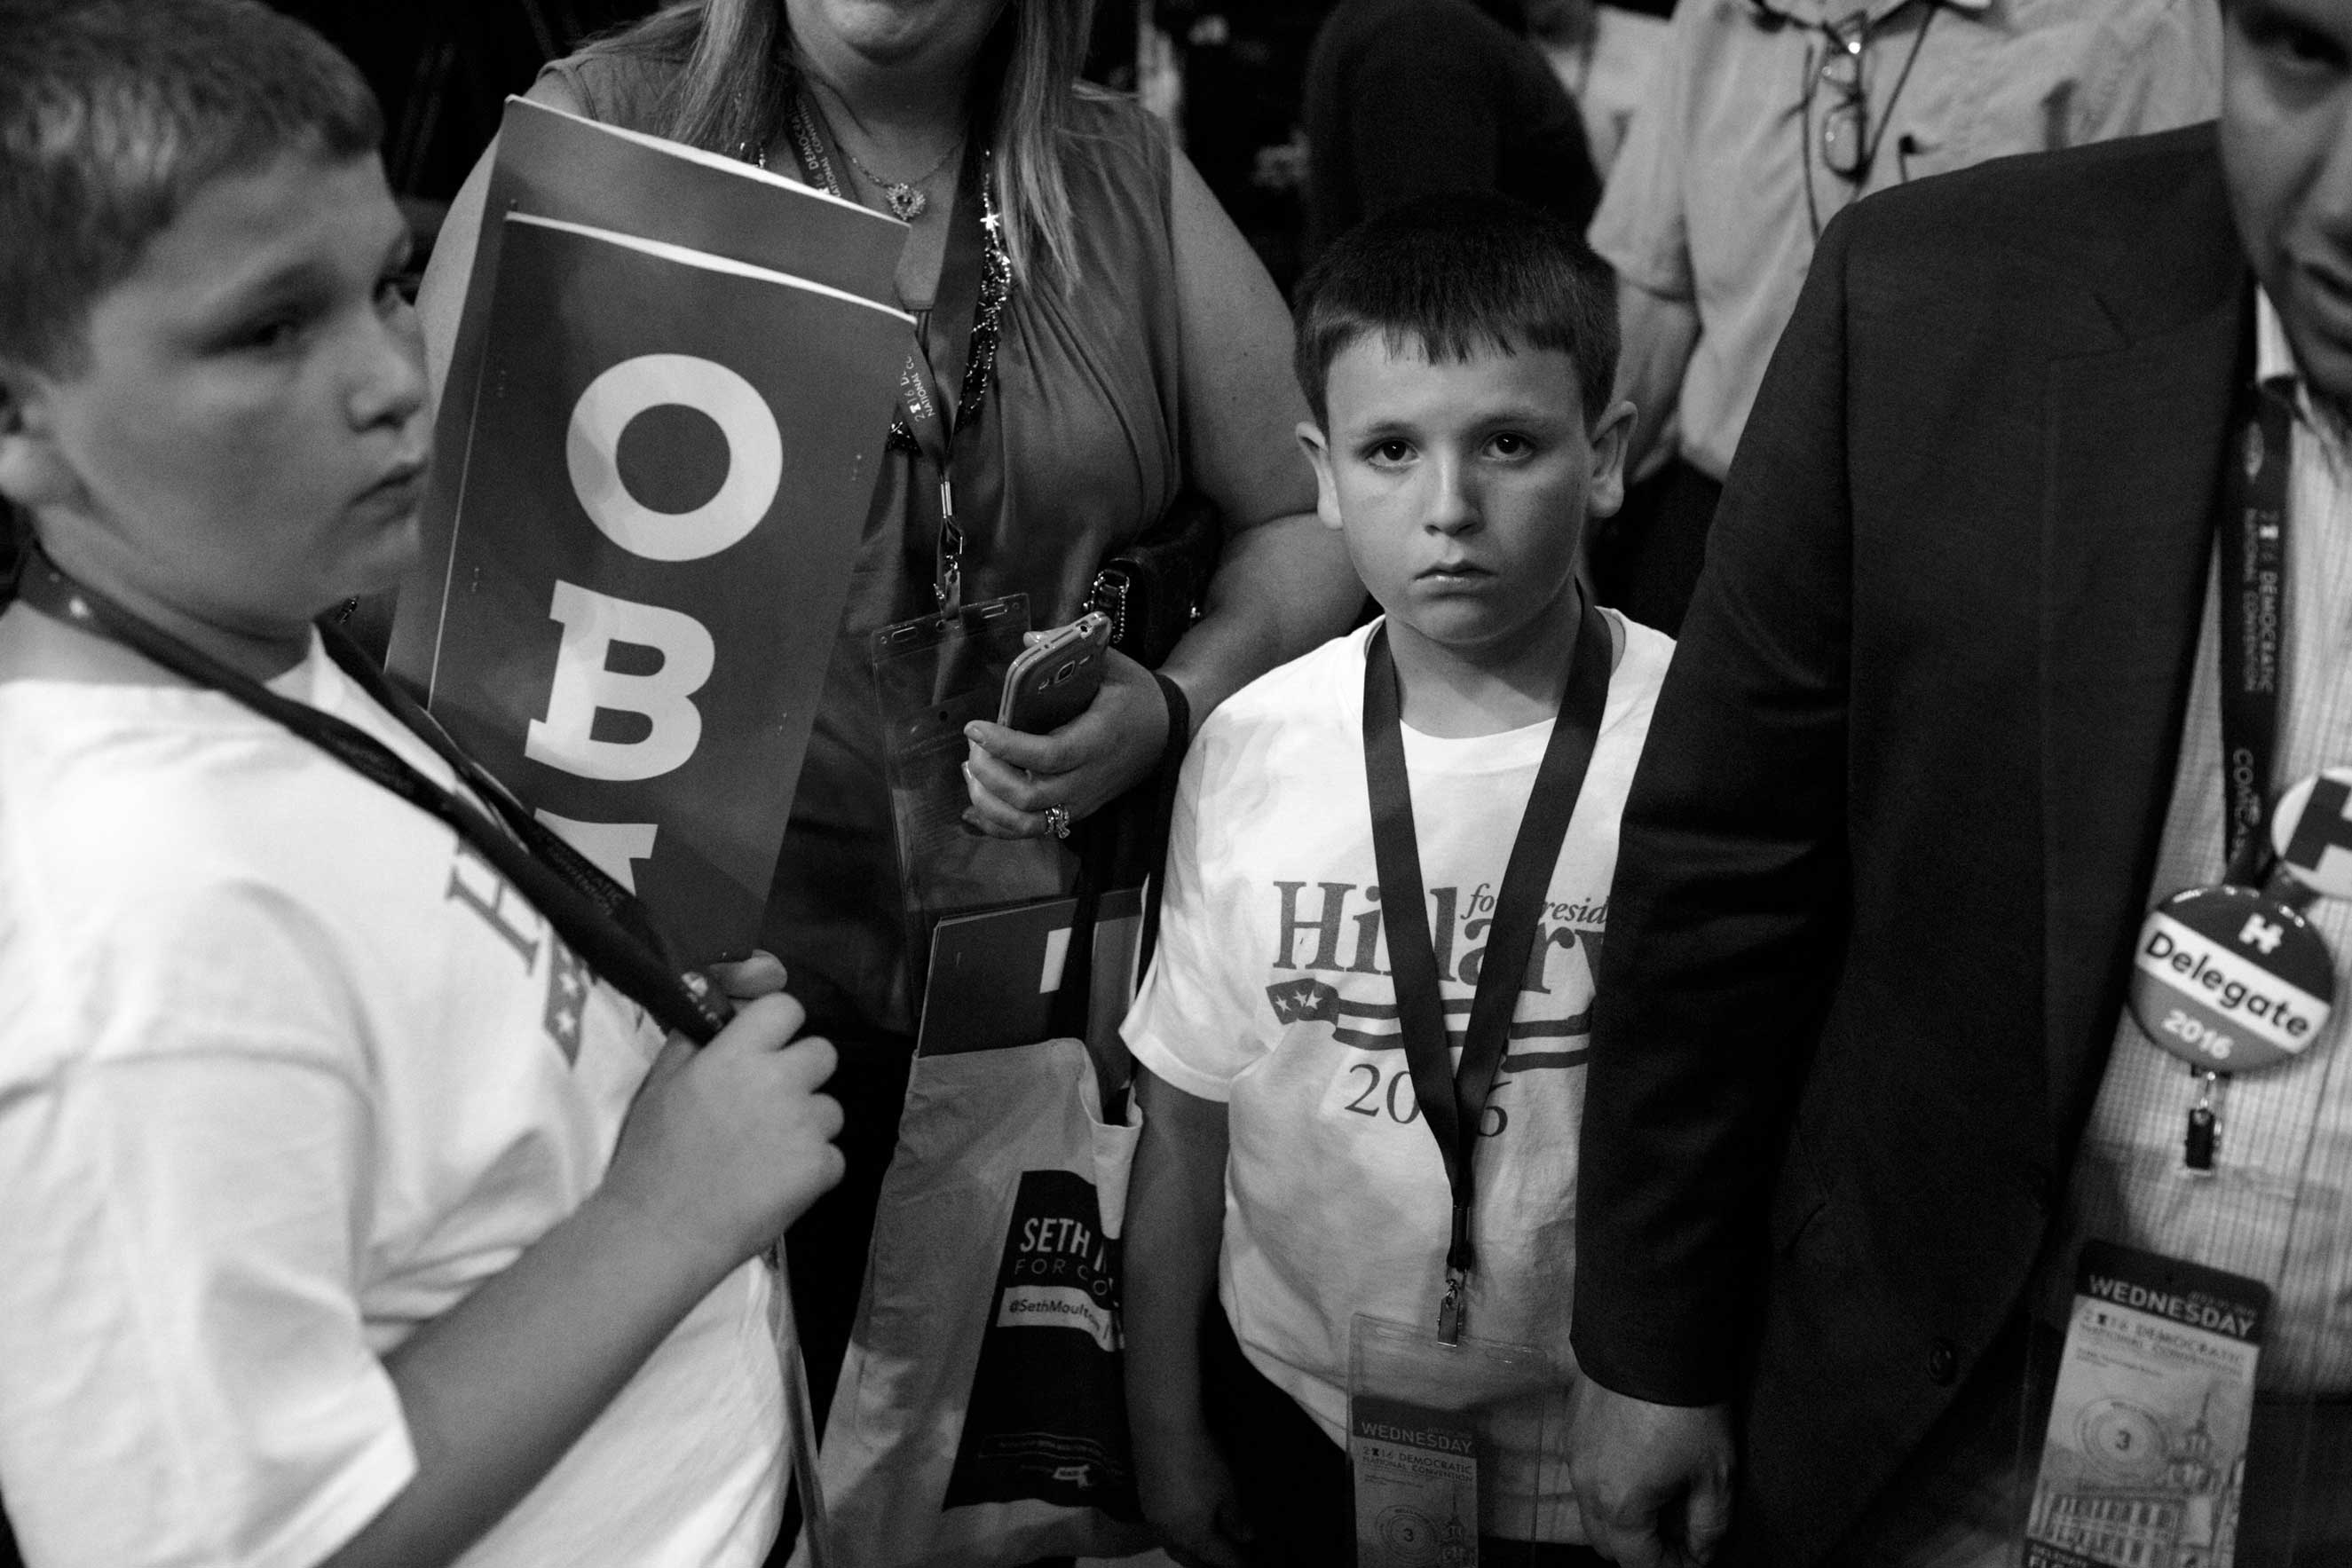 27 July 2016 - Philadelphia, PA - Hillary supporters are on the convention floor after the third day of the Democratic National Convention comes to an end. President Barack Obama and Vice President Joe Biden were addressing the delegates earlier this evening.